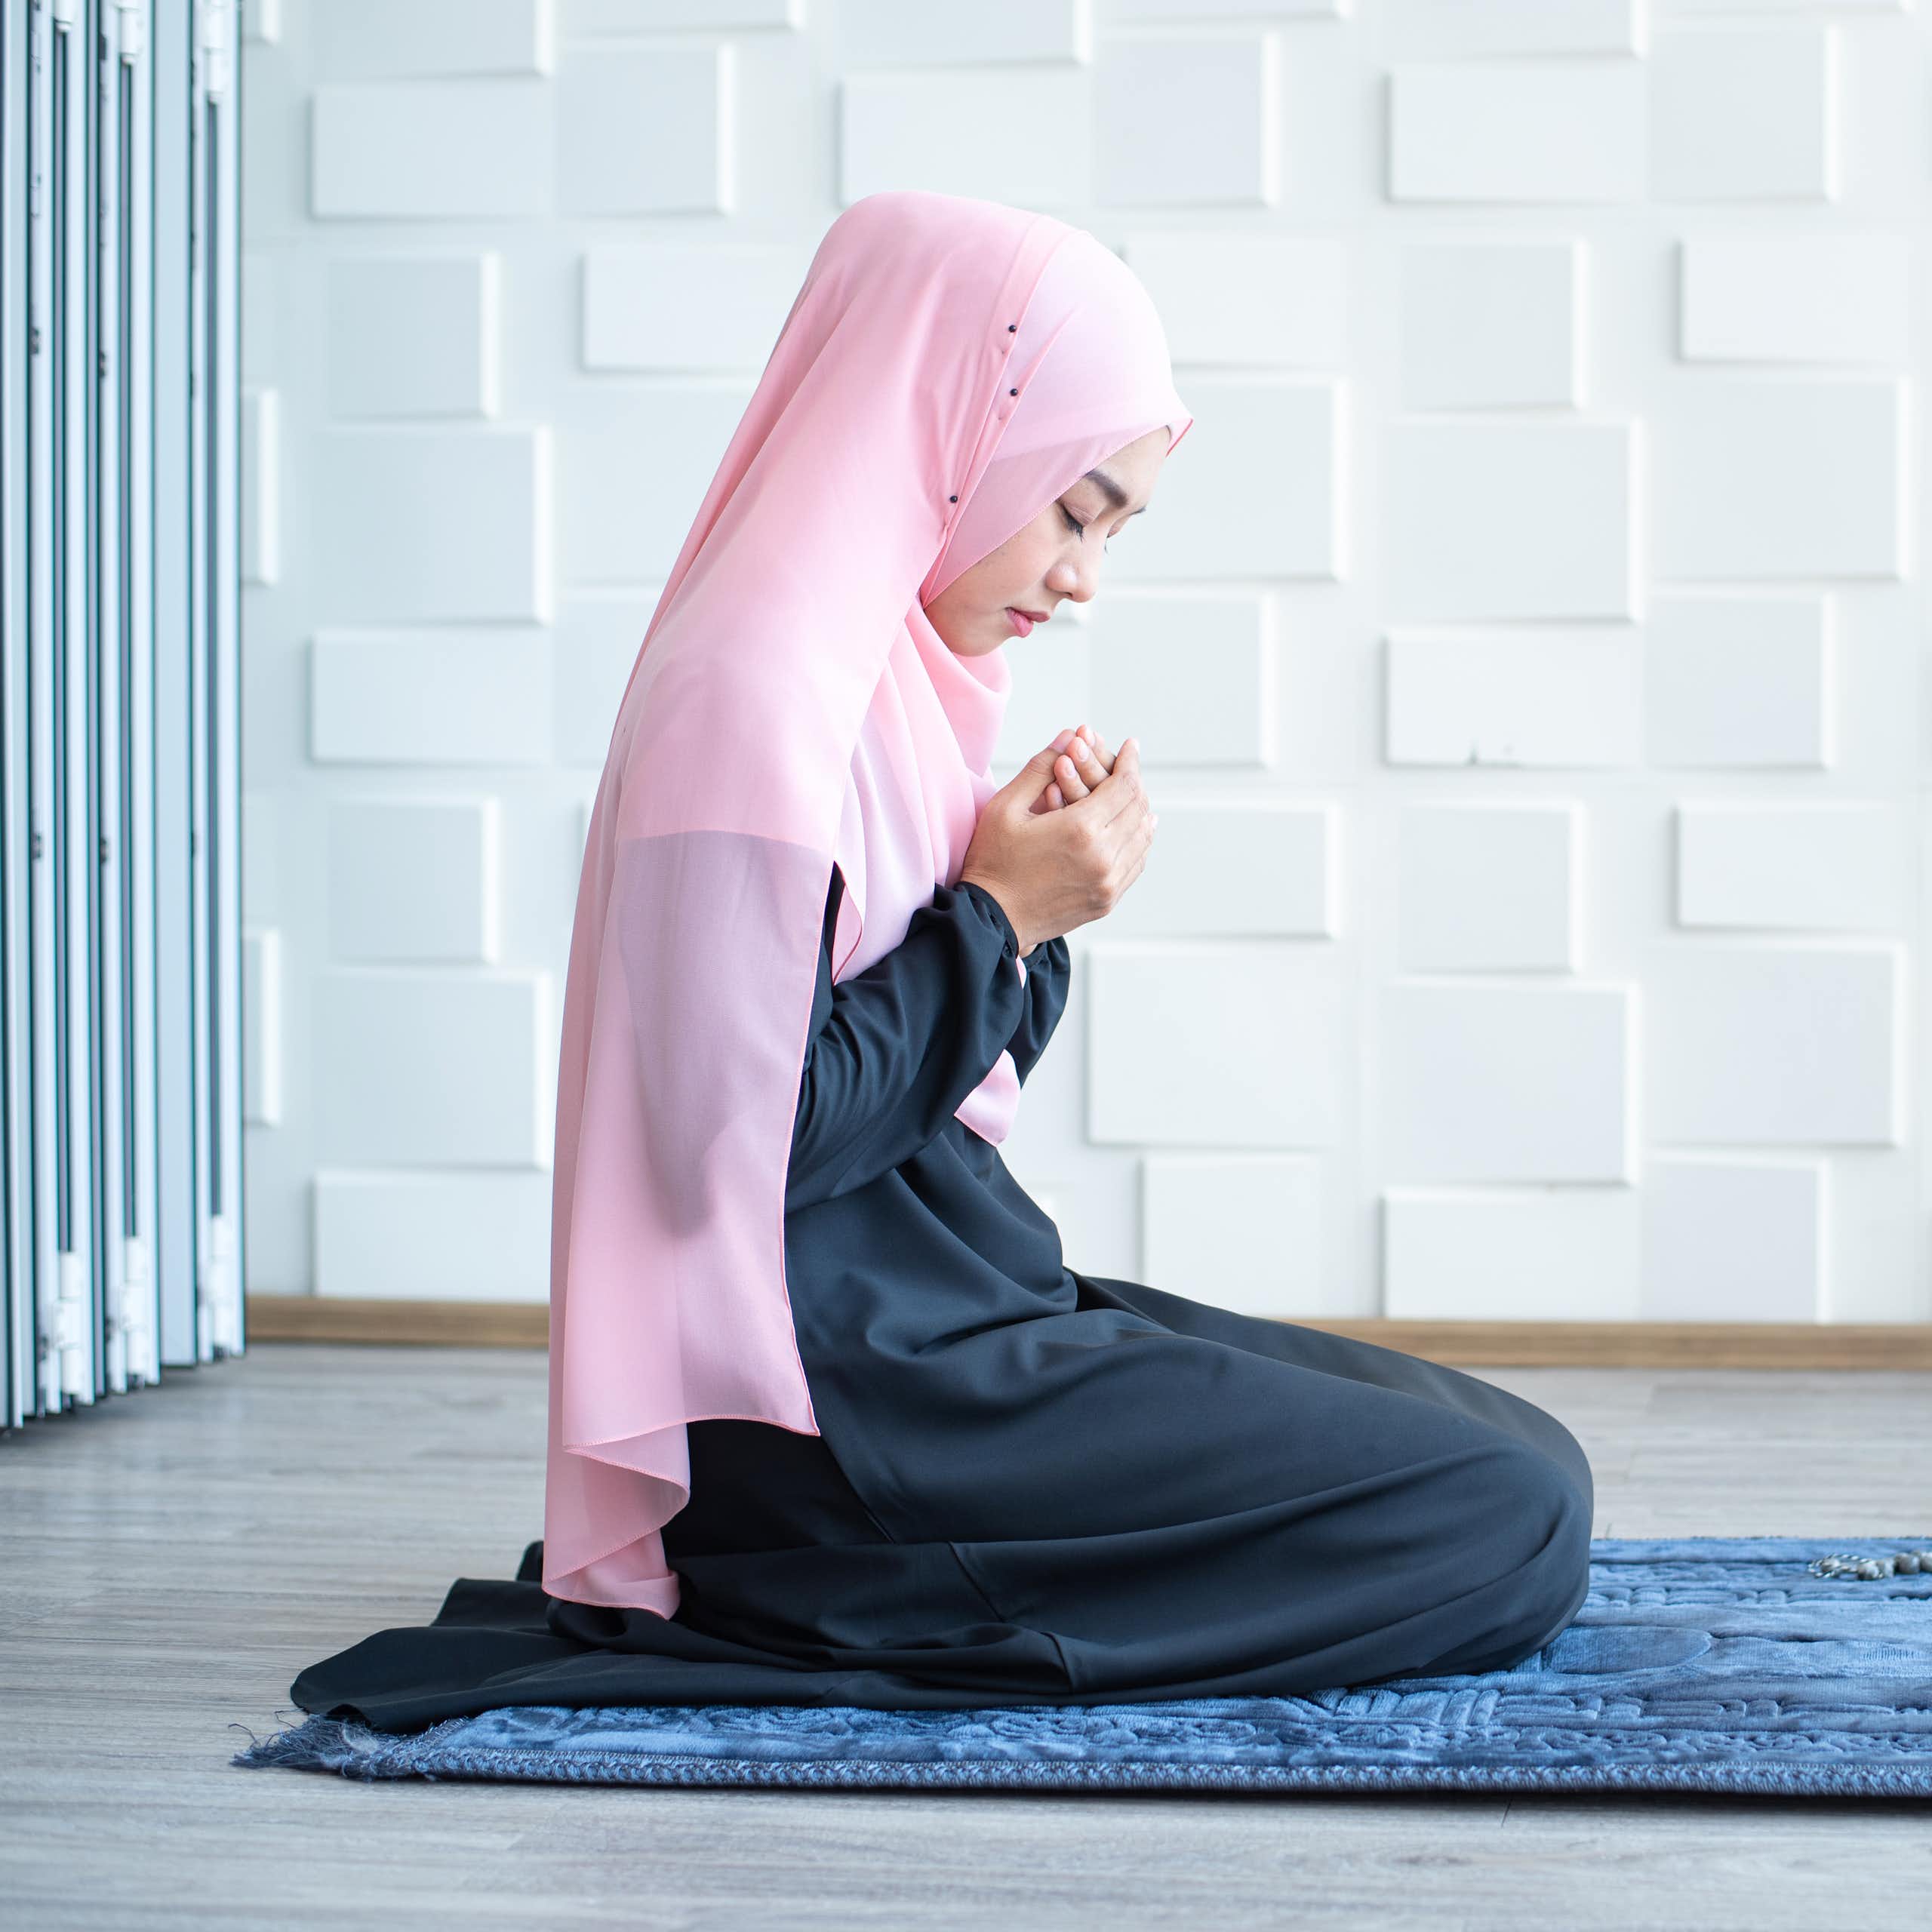 A young girl wearing a pink headscarf kneels on a blue prayer rug. The Qur'an is open on a small stand nearby.